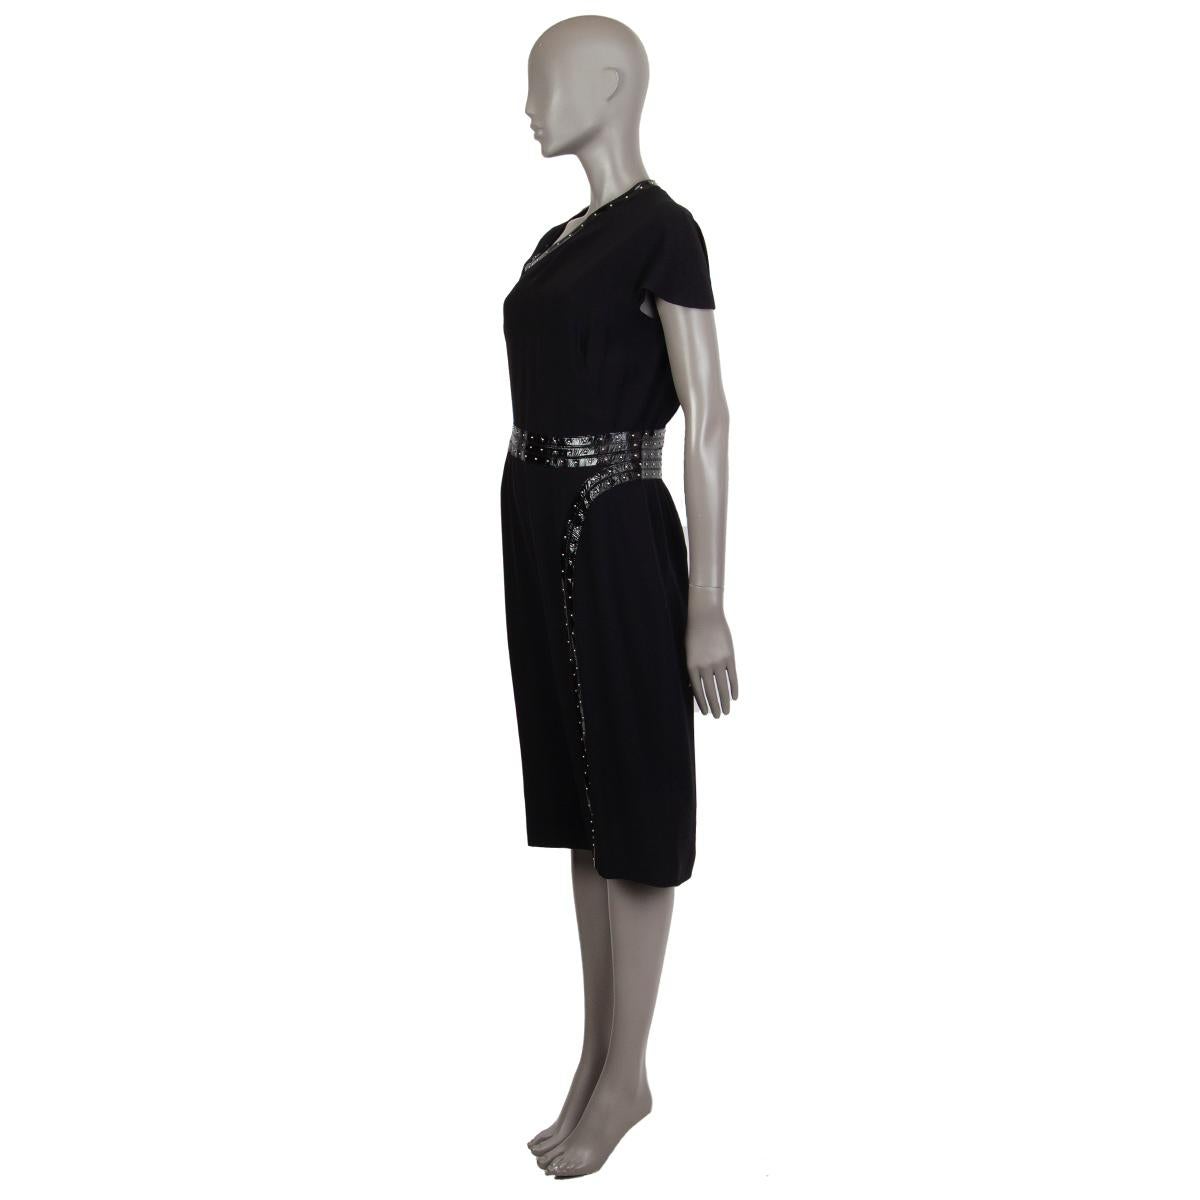 Alexander McQueen patent-trim with studs dress in black acetate (48%) viscose (48%) leather (4%) with an asymmetrical neckline. Has a frontal side slit. Closes on the back with a zipper. Lined in acetate (74%) and silk (26%). Fabric sewing has come